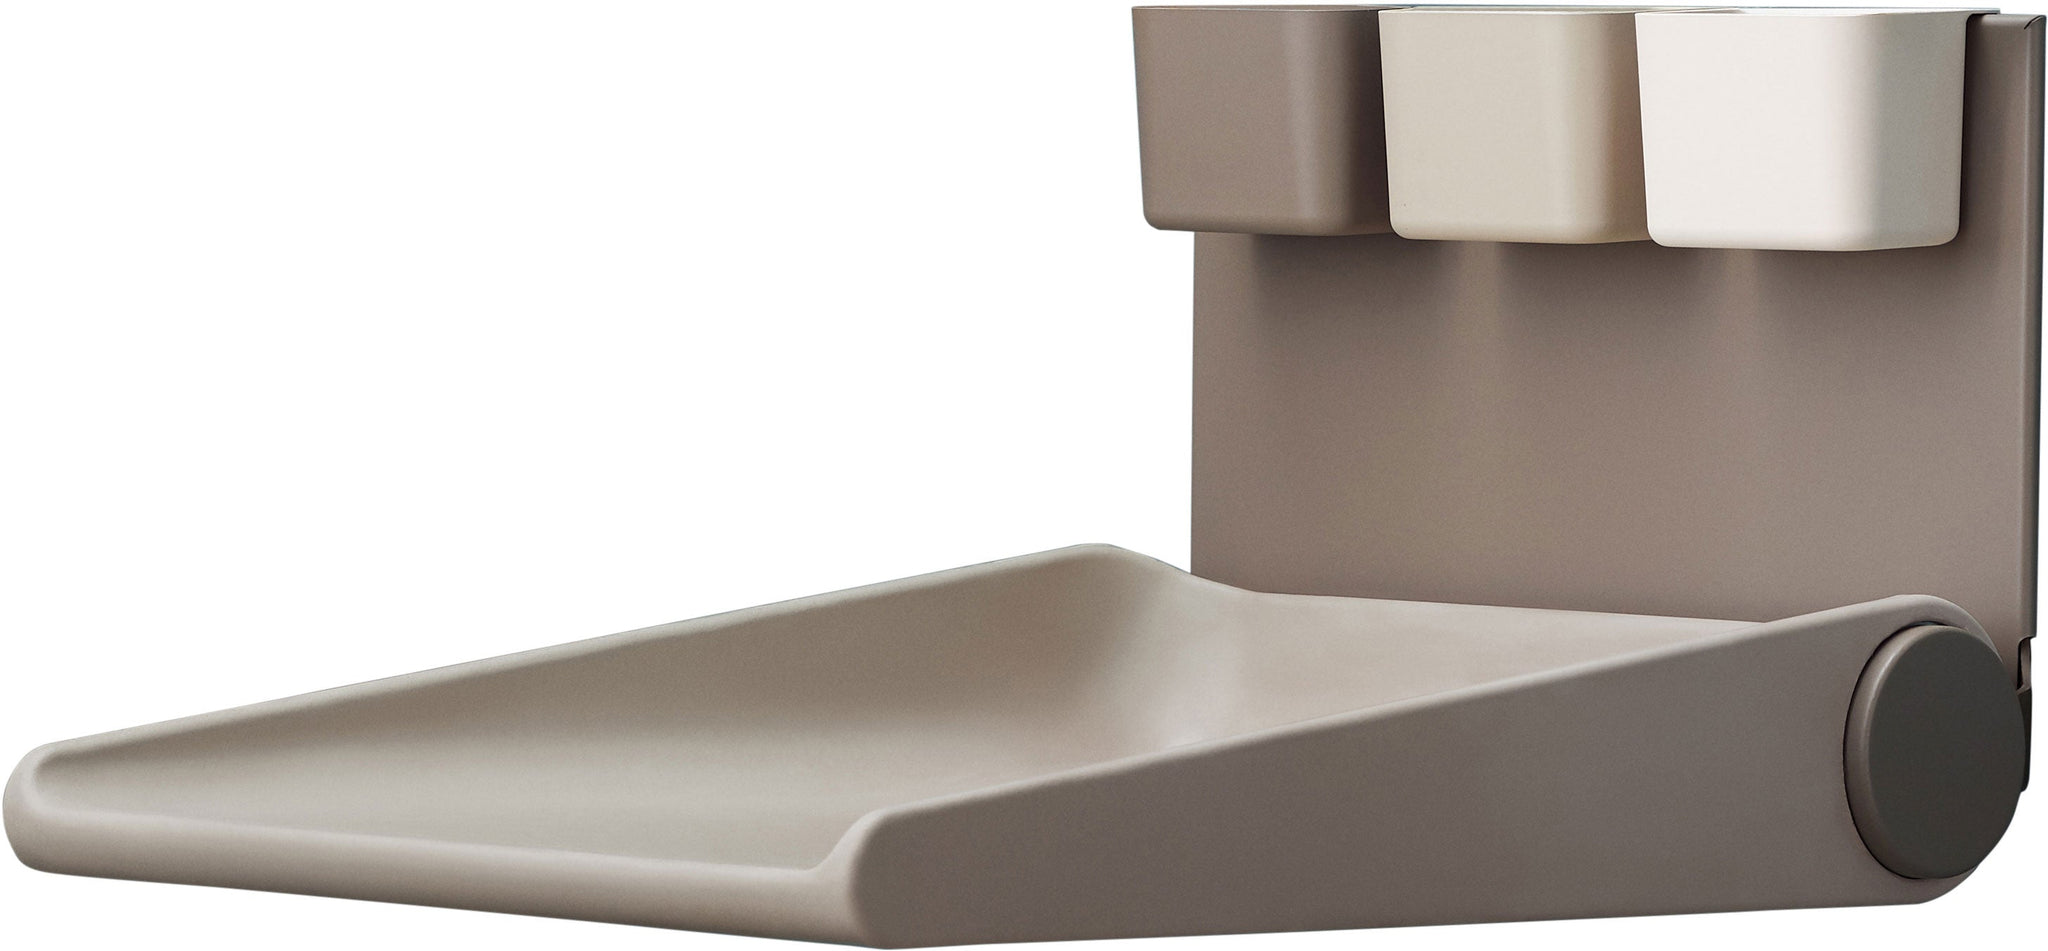 Wally Wallmounted Changing Table Capuccino - Leander